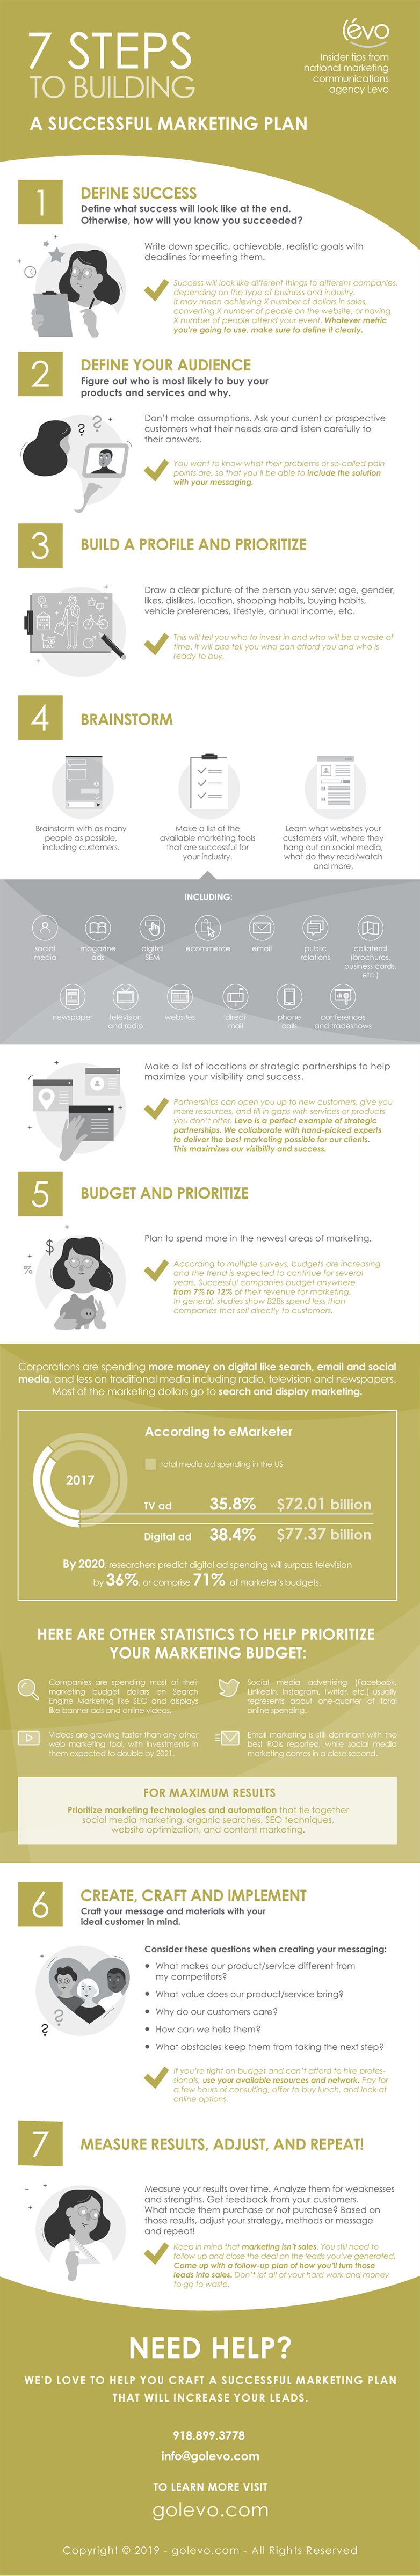 Successful Marketing Plan in 7 steps infograhic